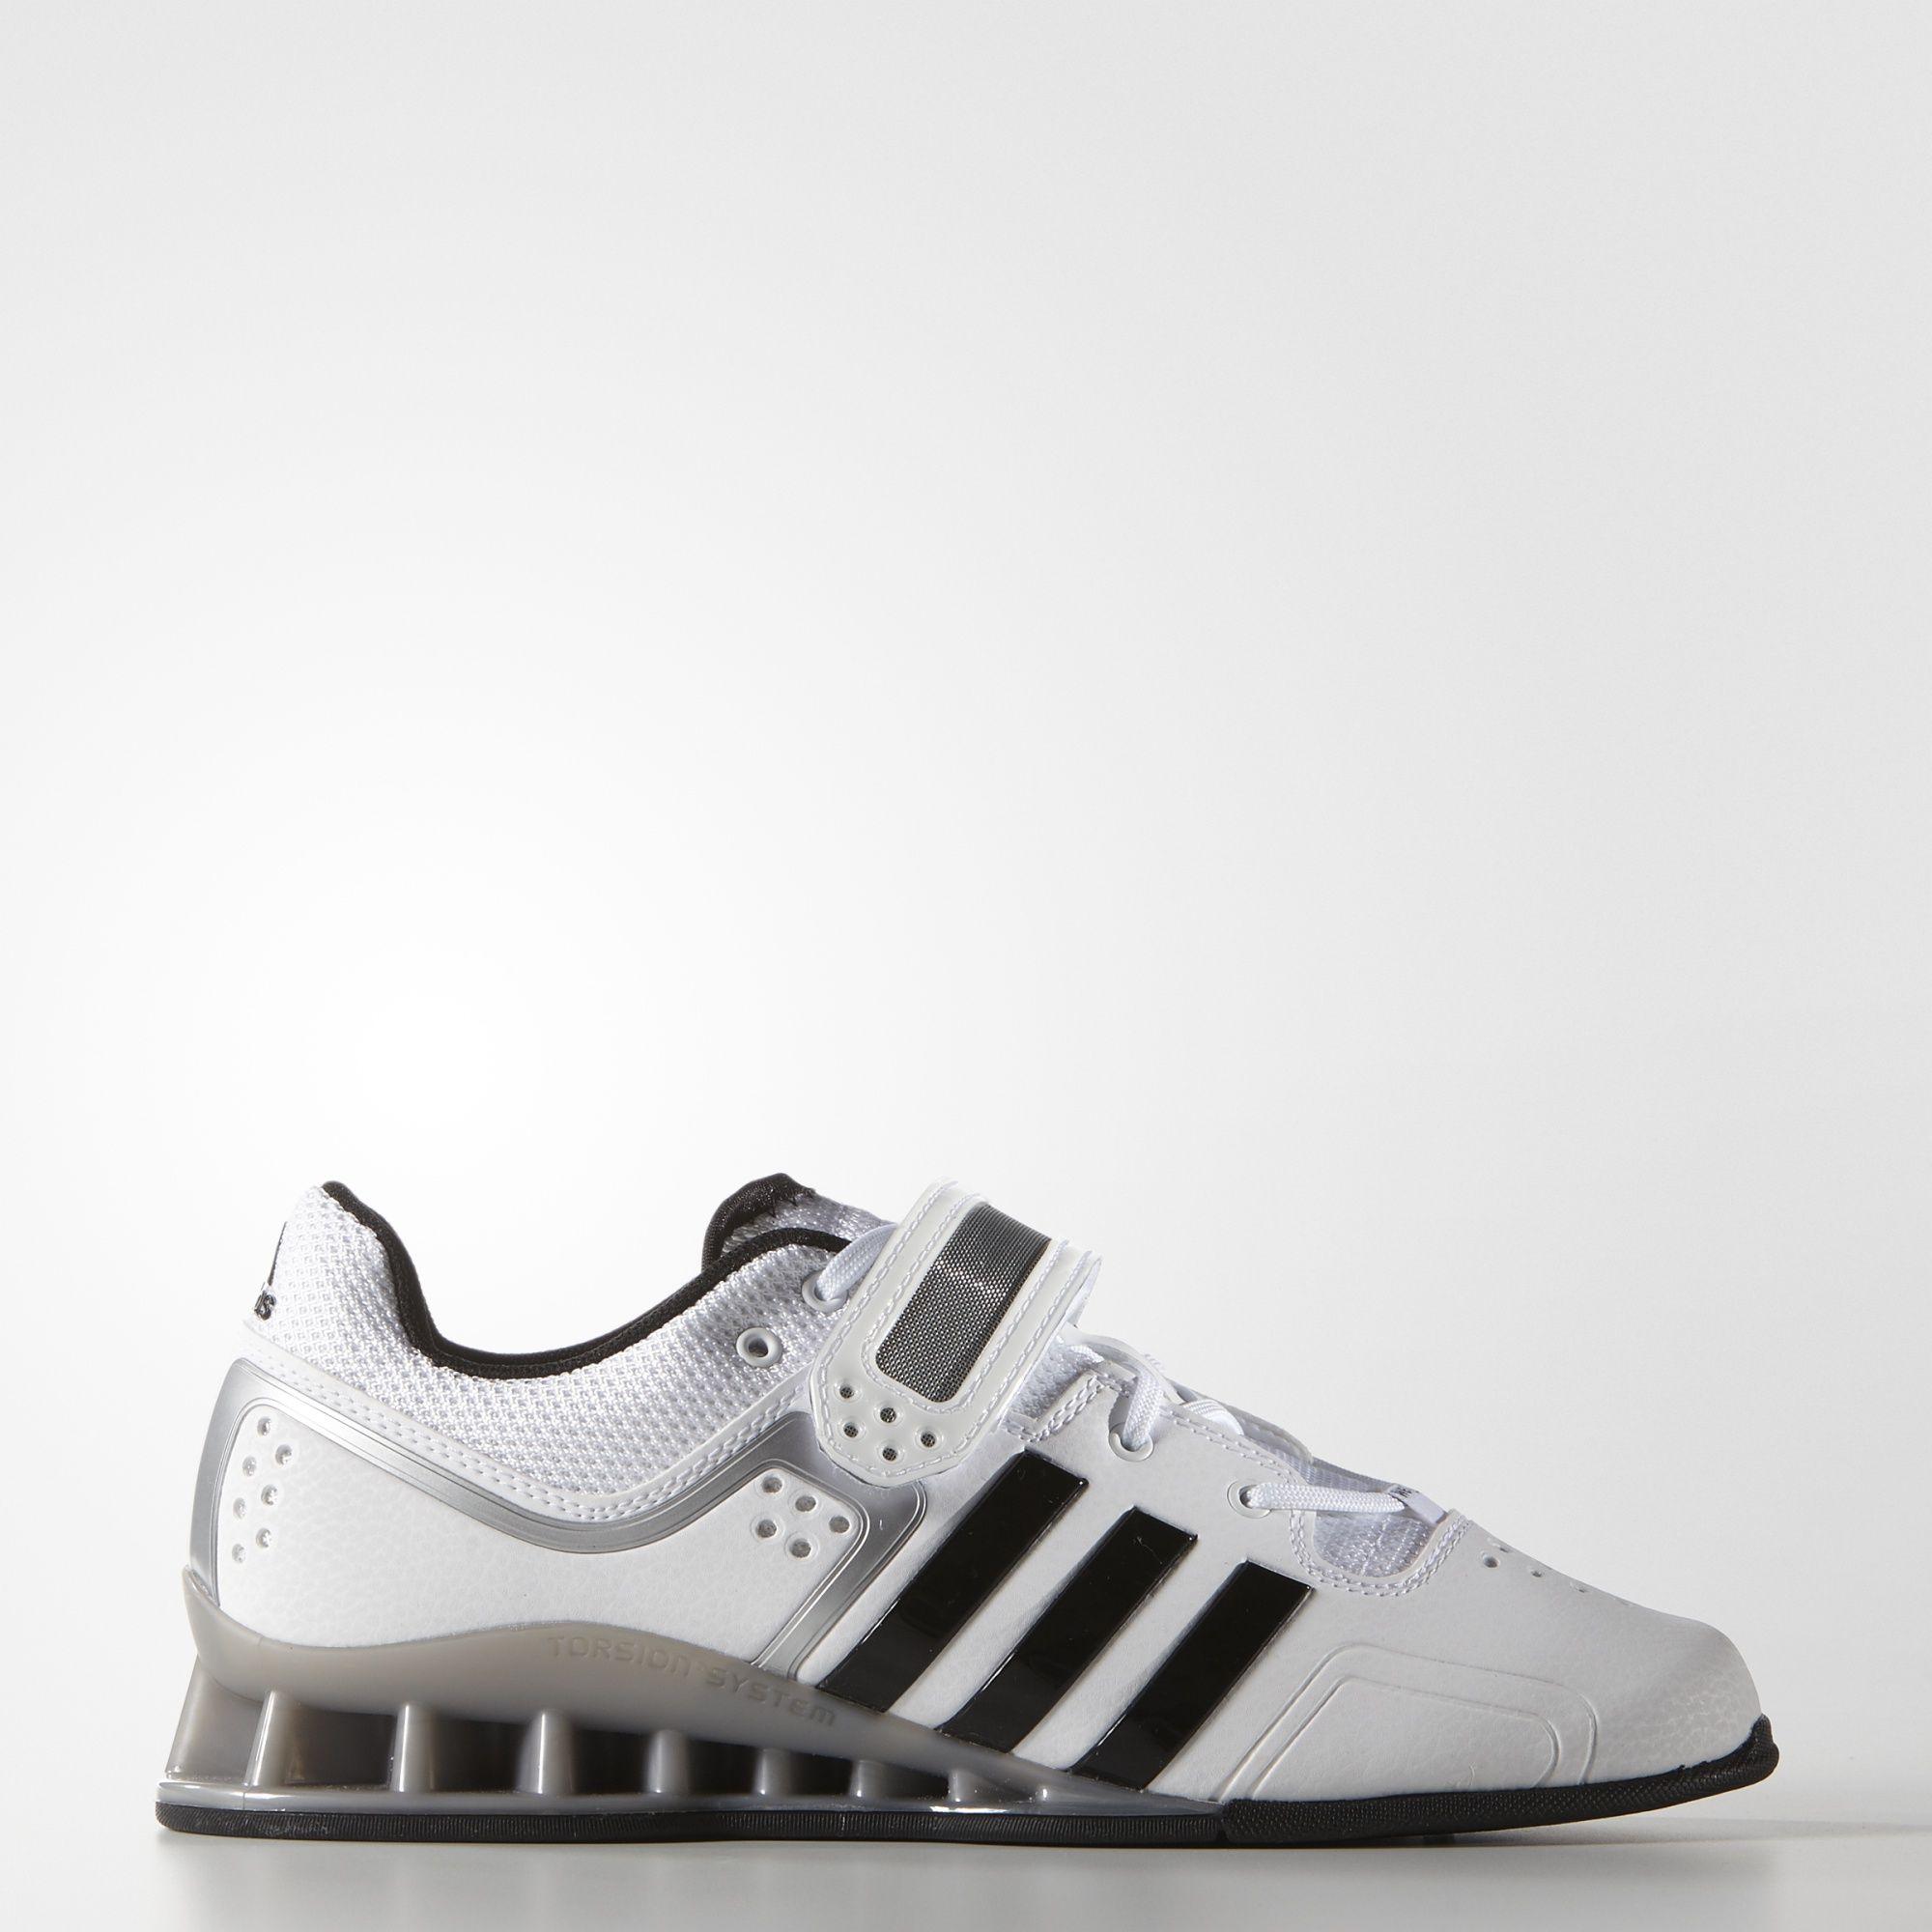 Adidas Weightlifting Logo - Adidas adiPower Weightlifting Shoes Core White Core Black Tech Grey ...